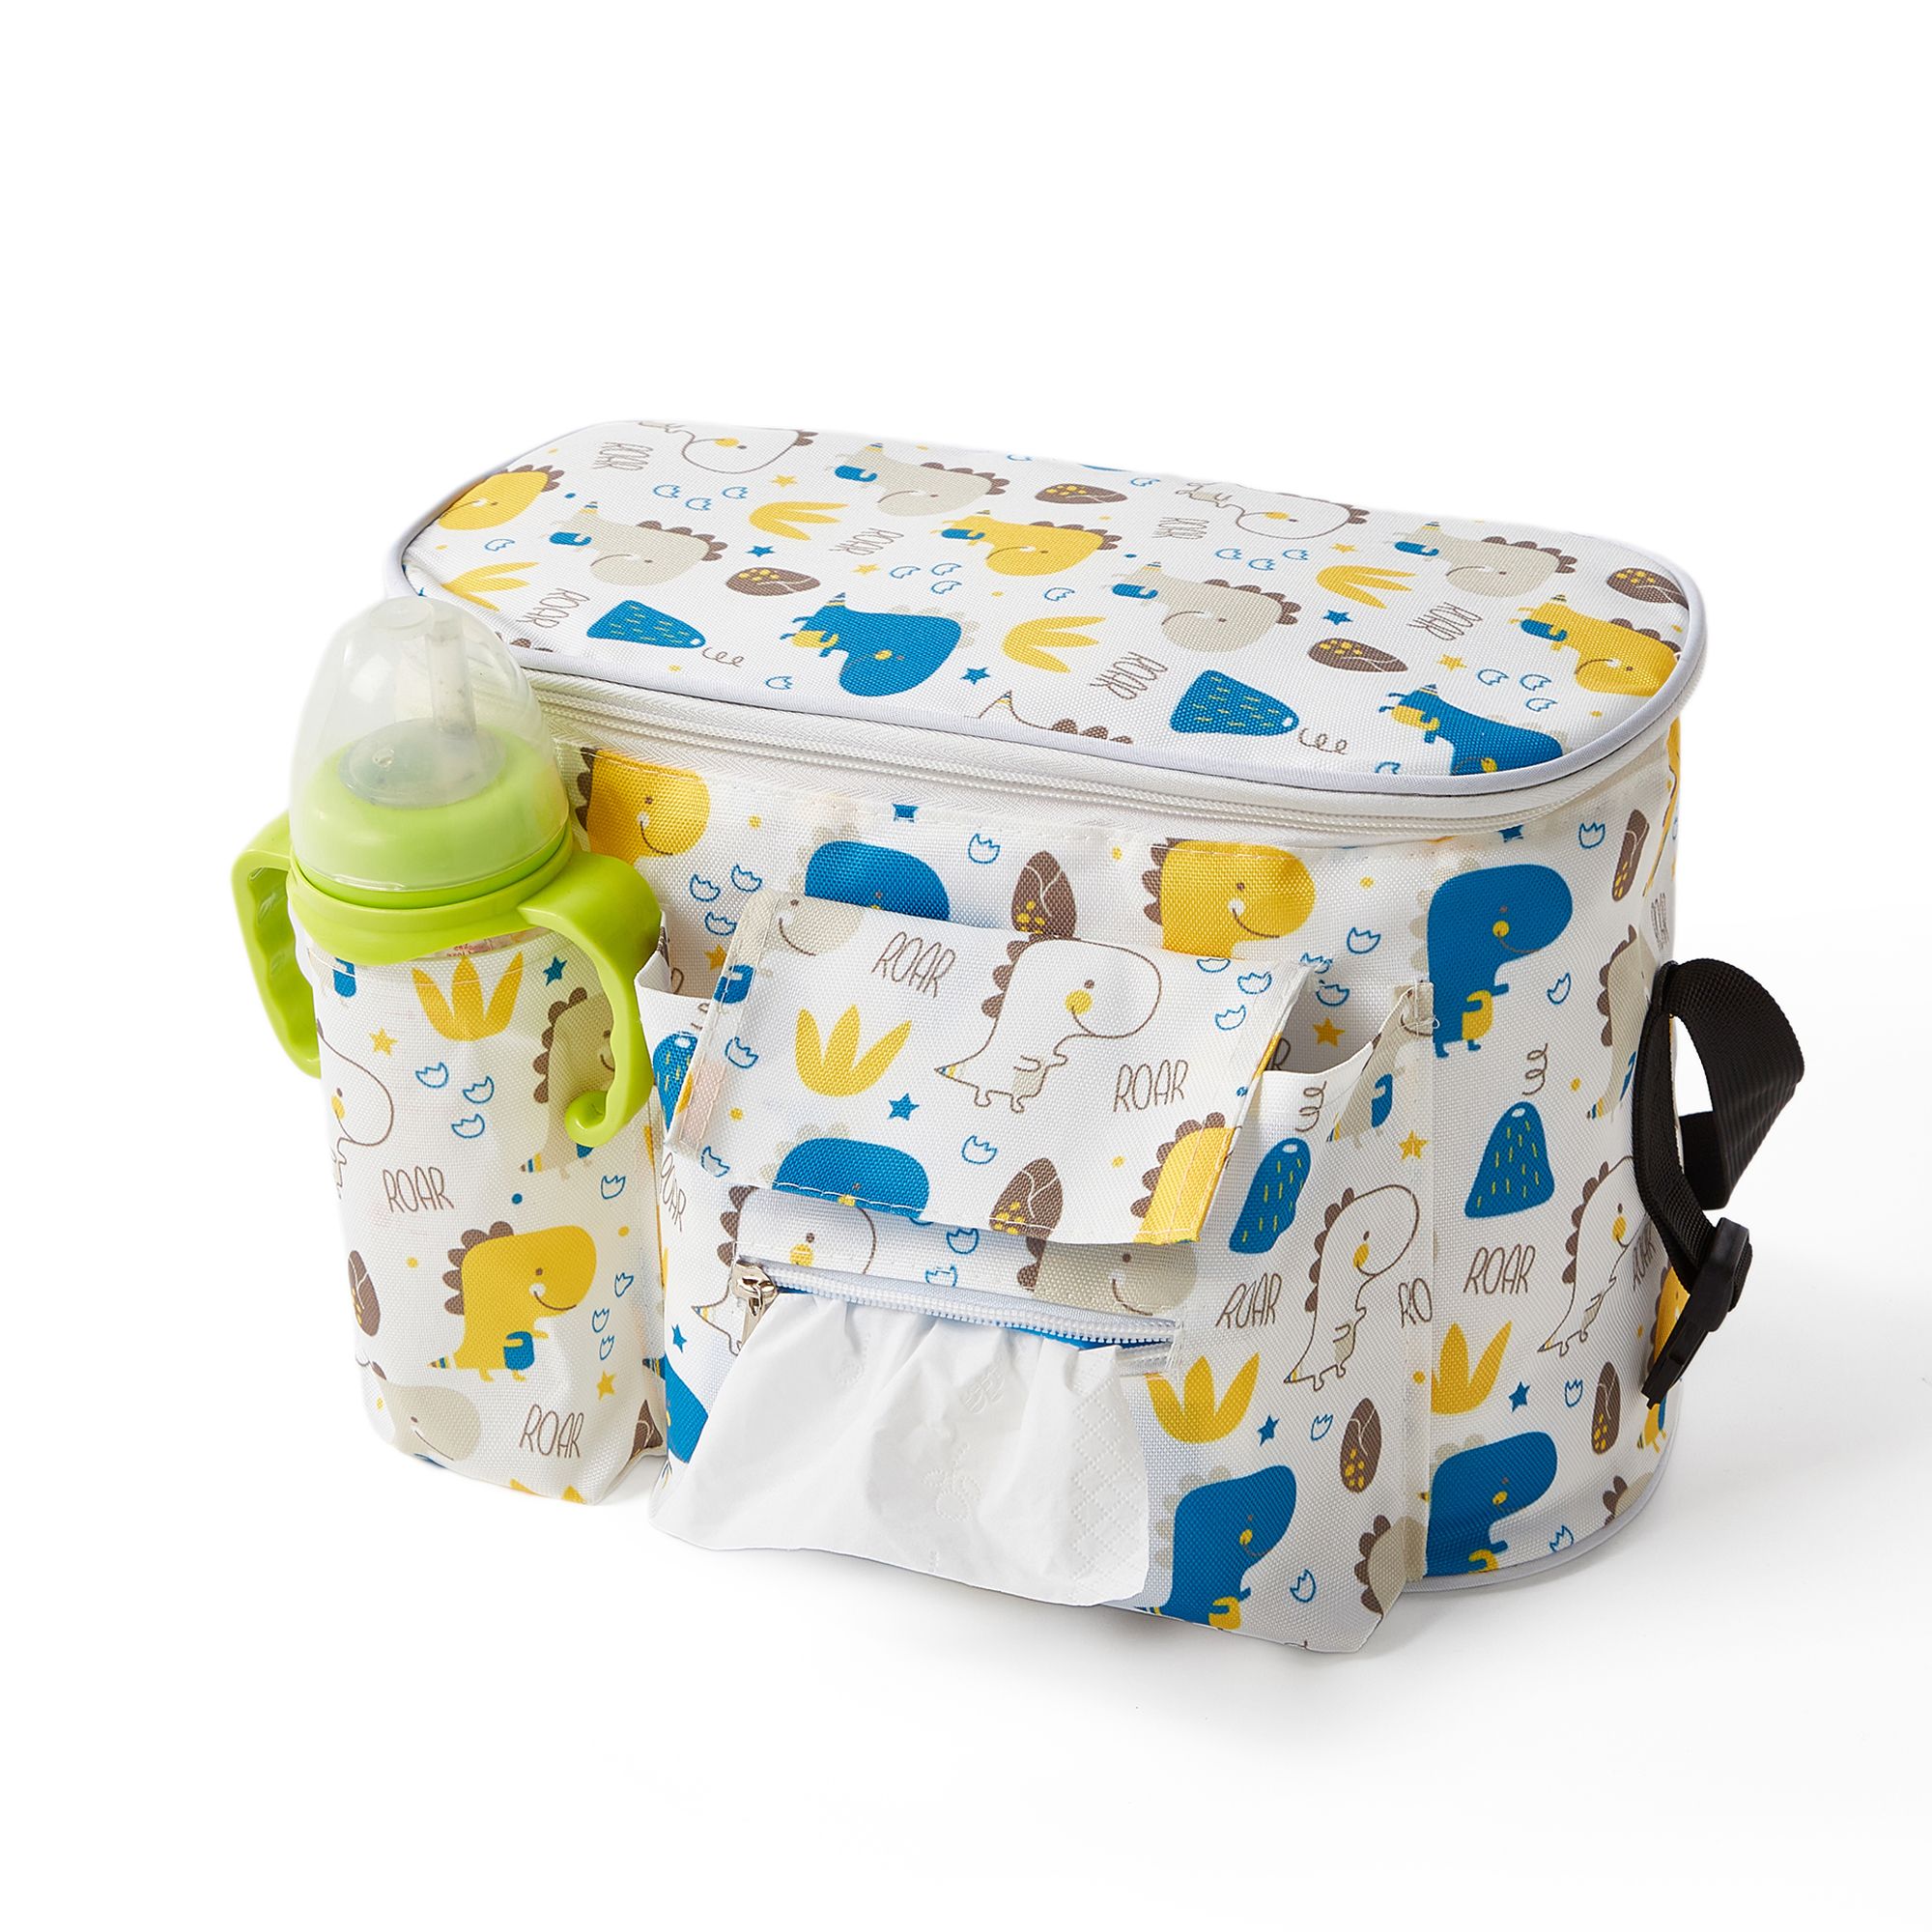 

Baby Stroller Organizer Bag: Multifunctional Storage Solution for On-the-Go Moms